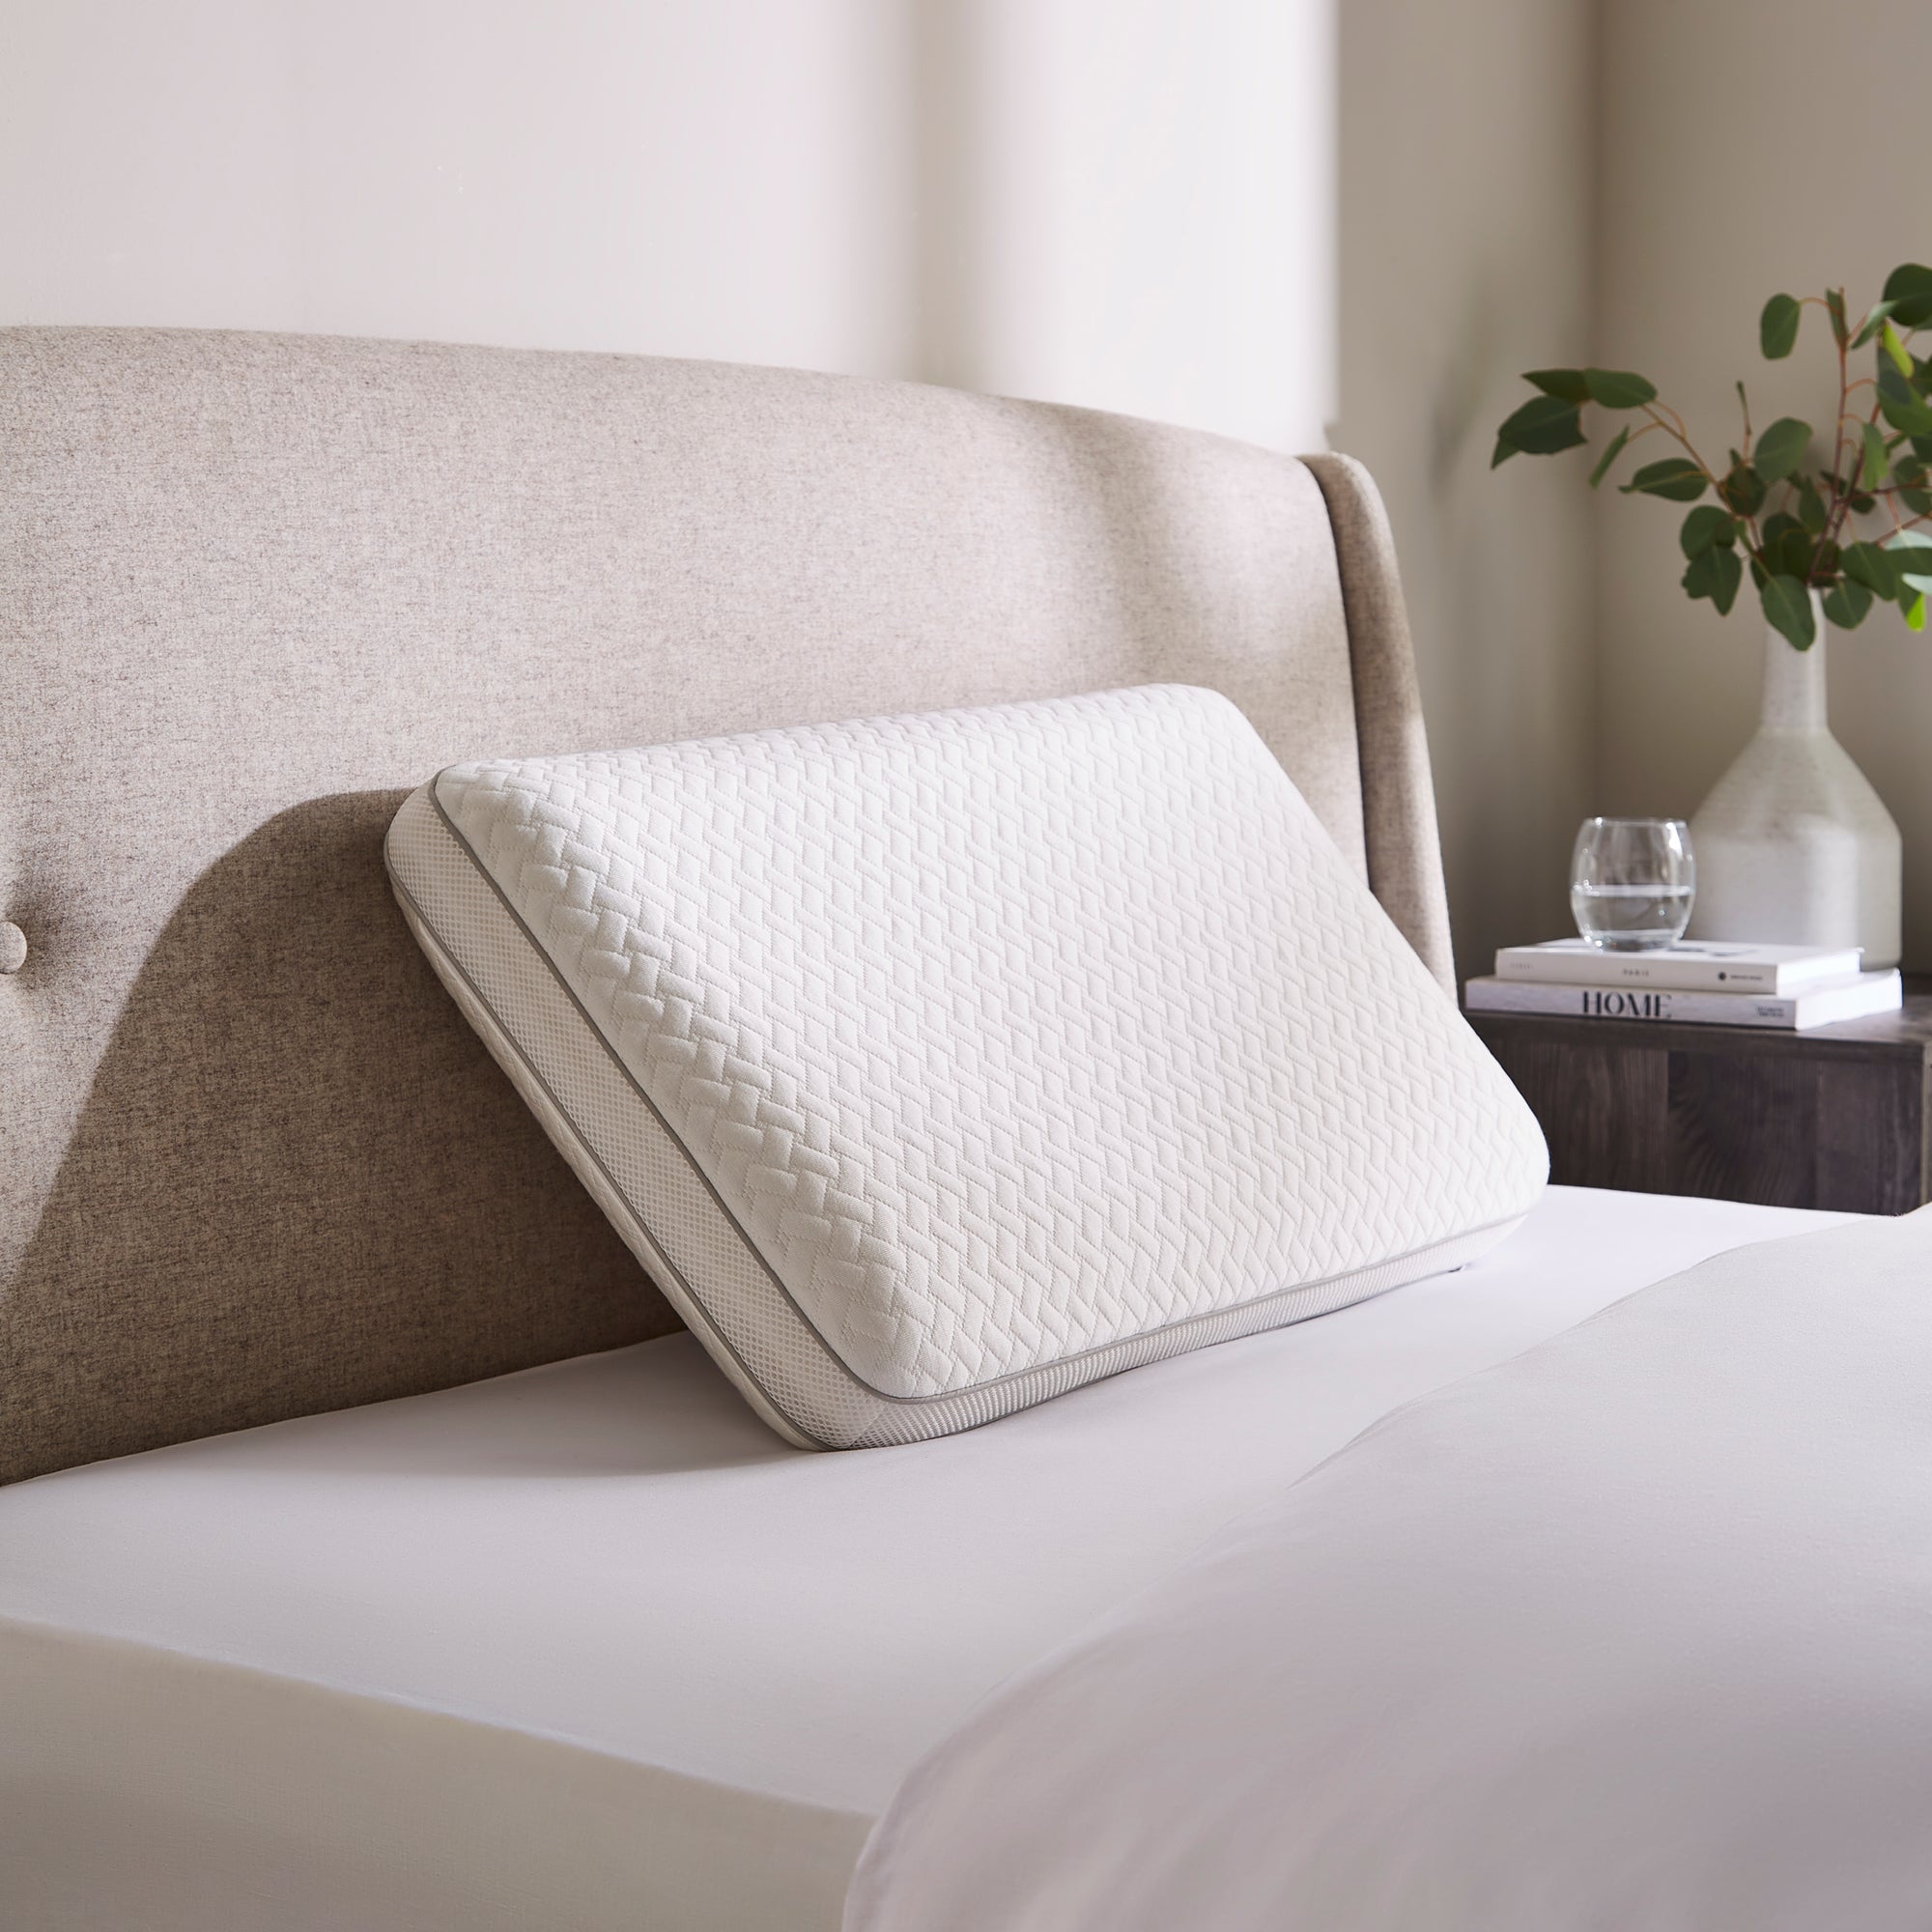 Buy Adjustable 3 Layer Memory Foam Pillow | The Fine Bedding Company